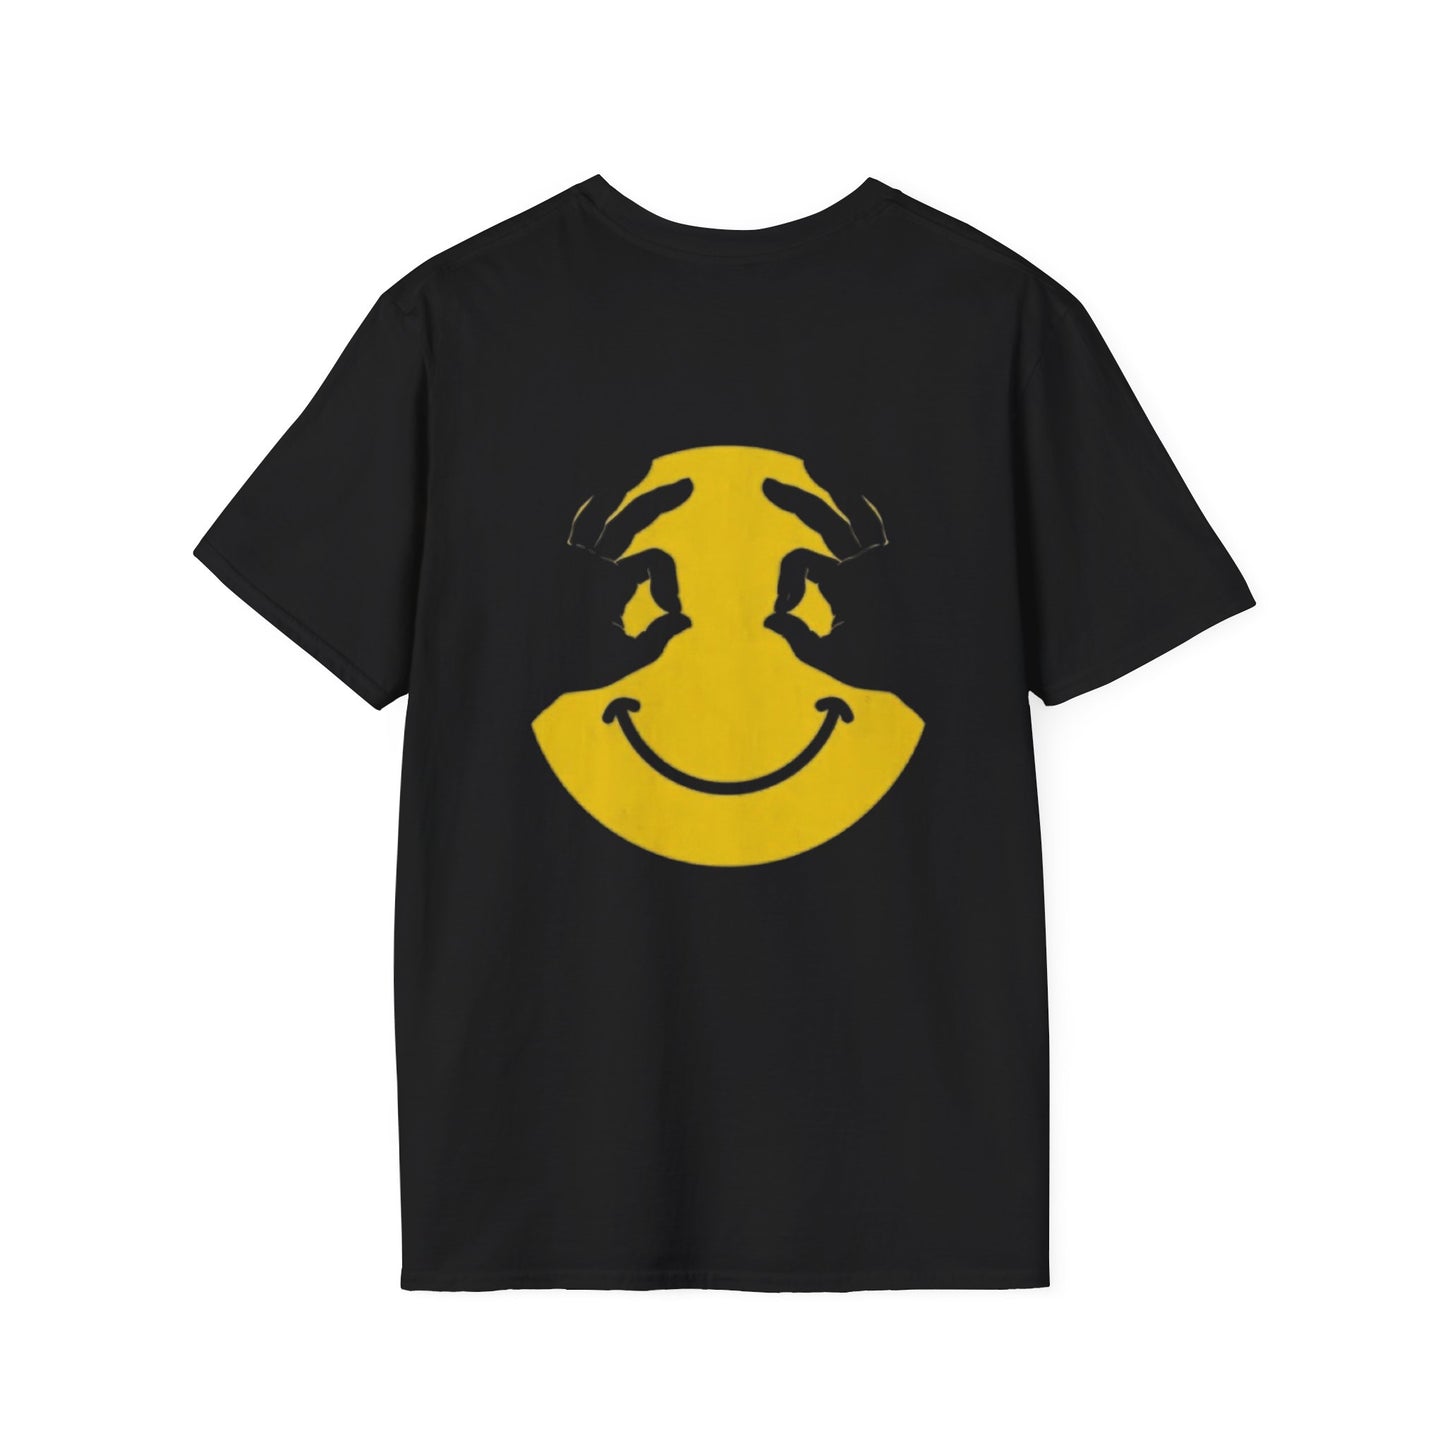 Emo Unisex Softstyle T-Shirt DOPiFiED edition